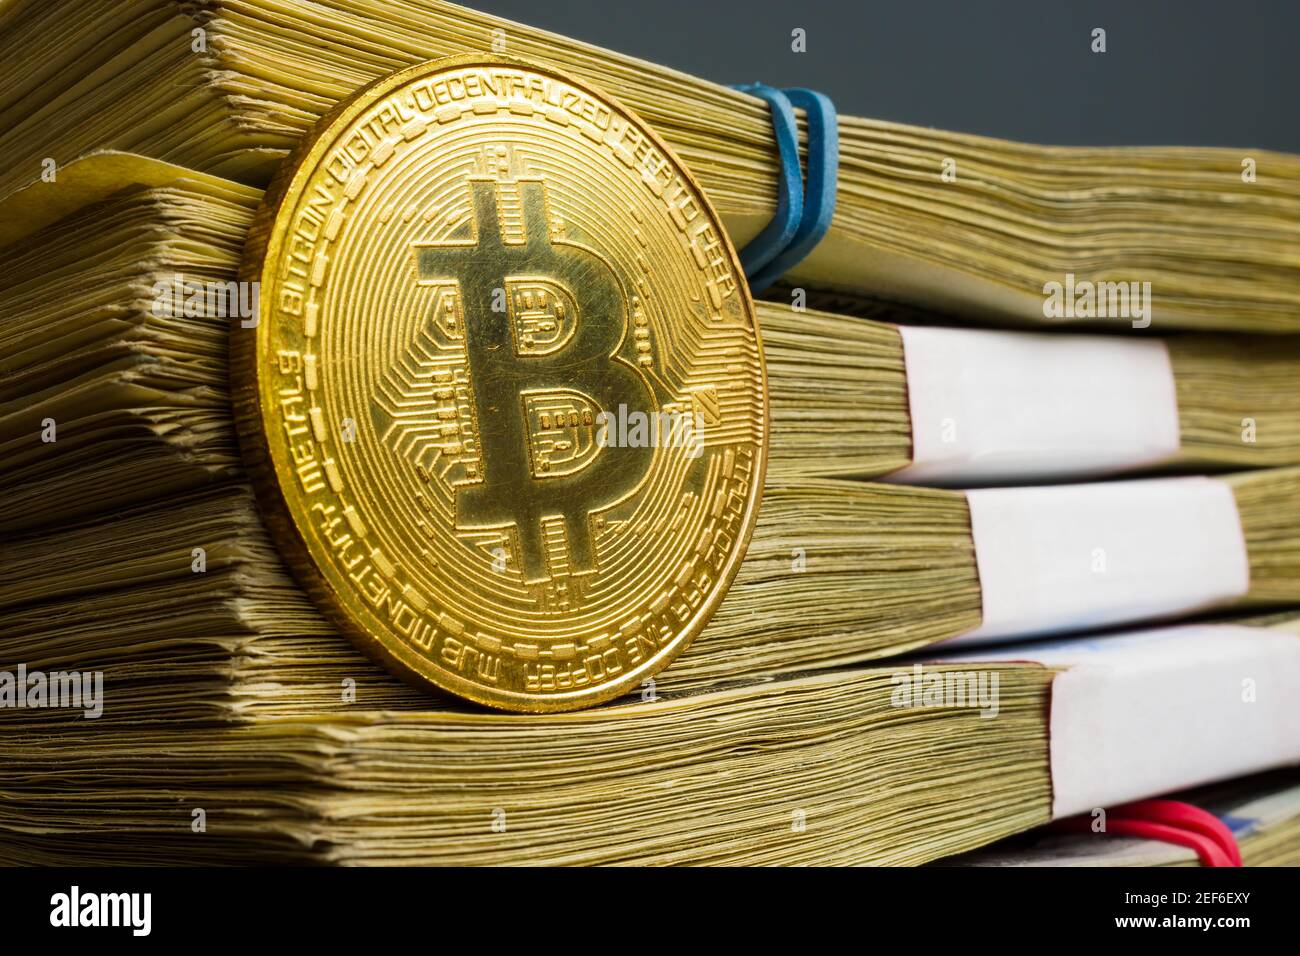 Bitcoin btc cost concept. Cryptocurrency coin and stack of money. Stock Photo